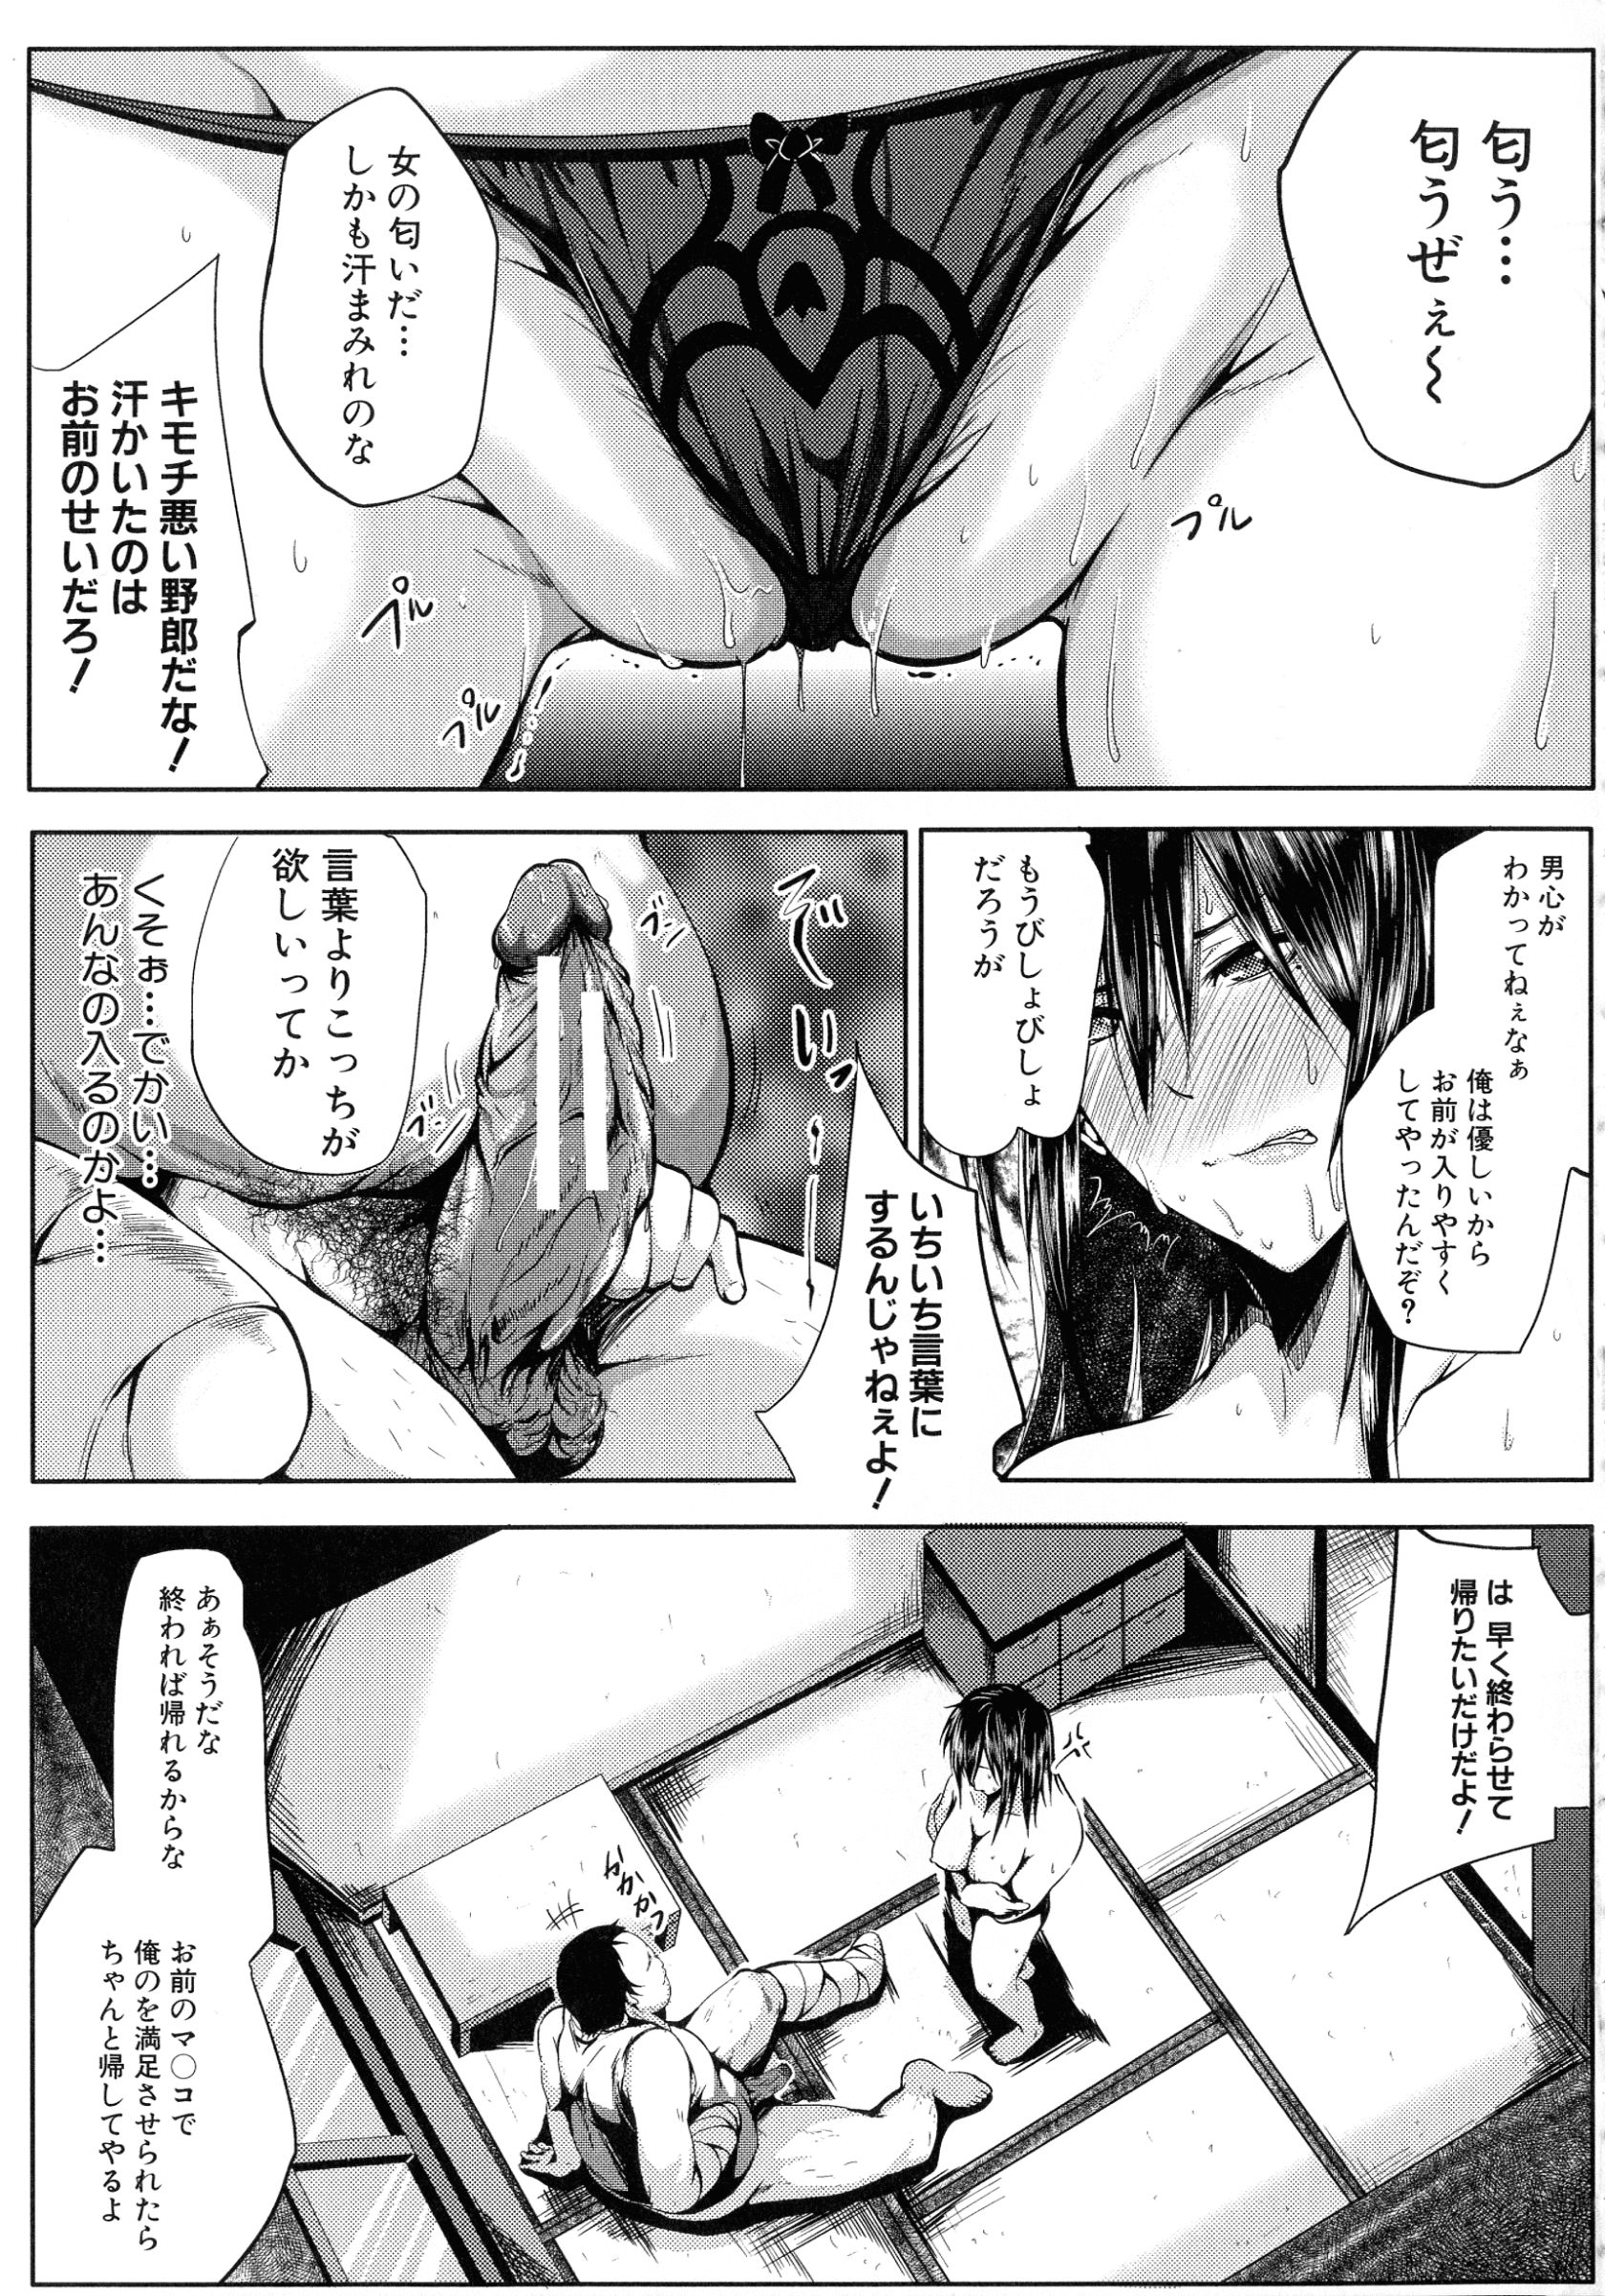 Page 113